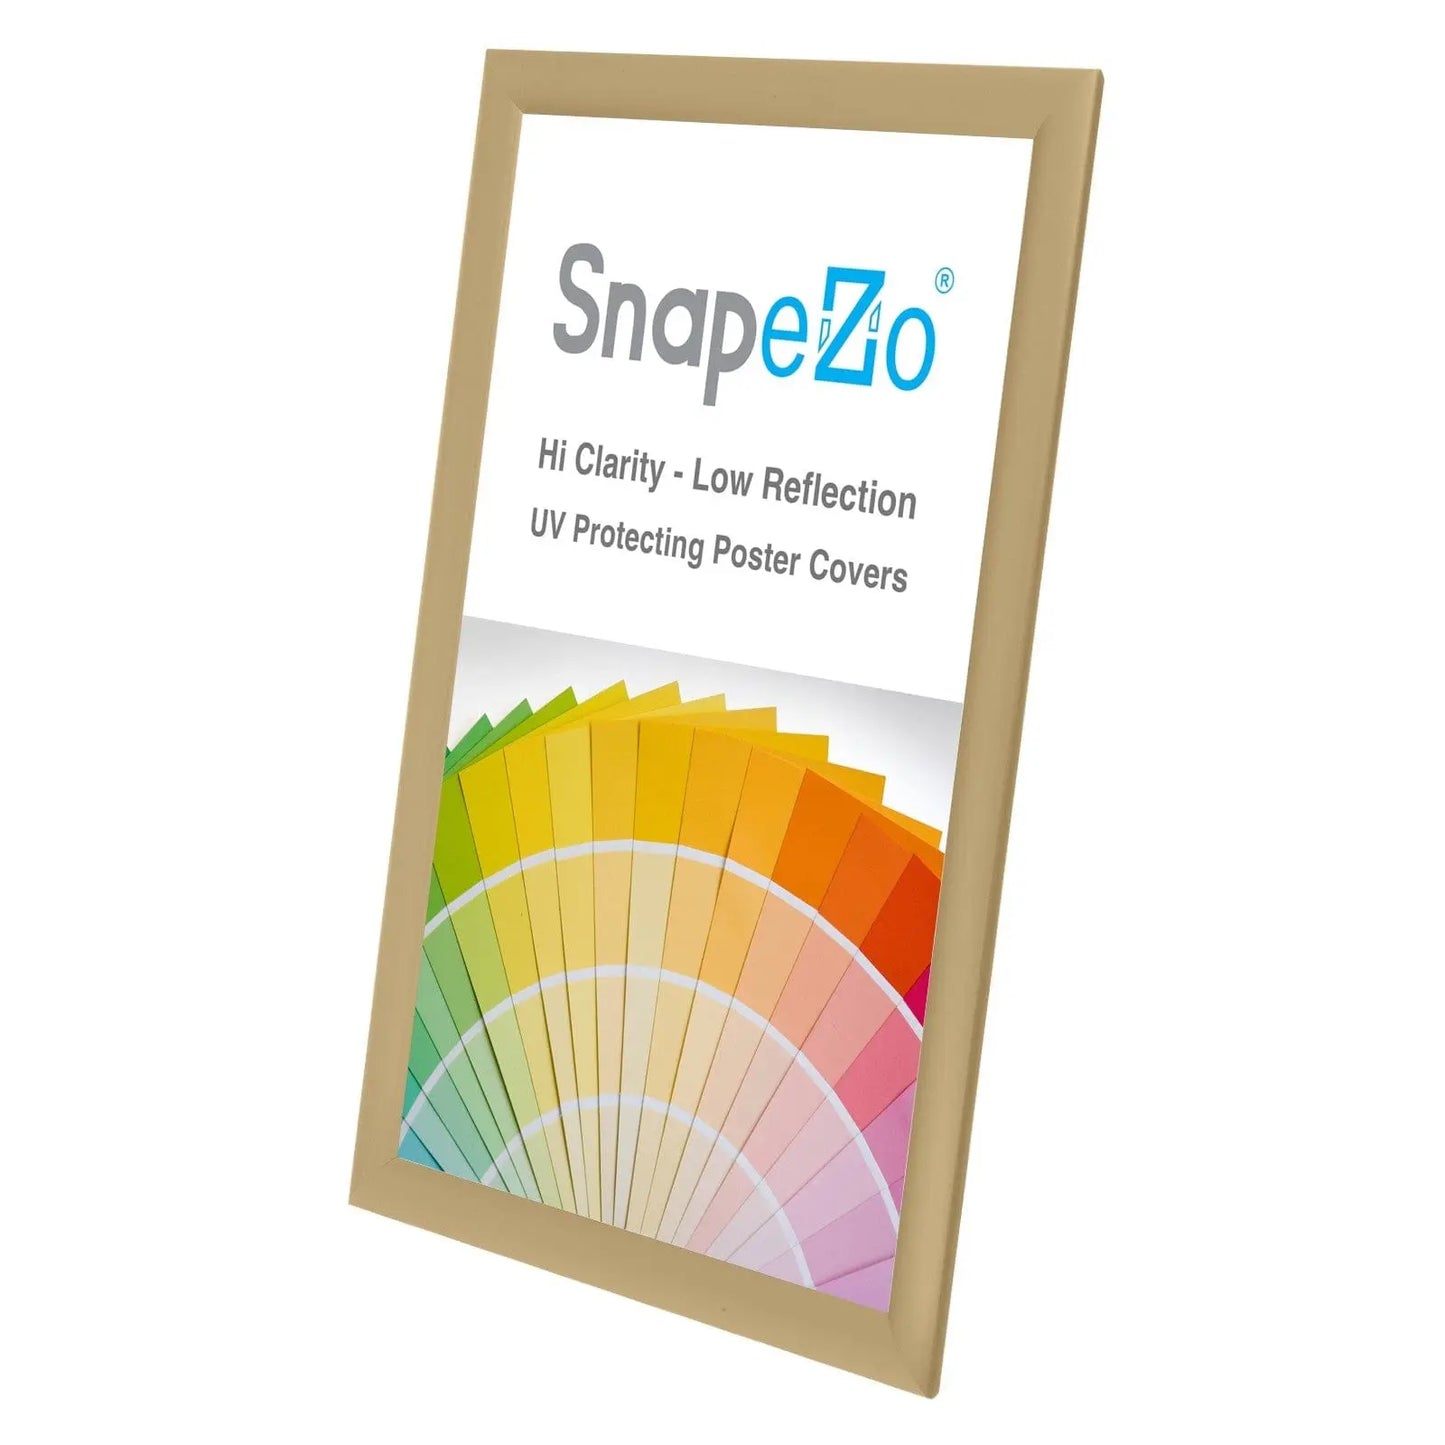 11x17 Gold SnapeZo® Snap Frame - 1" Profile - Snap Frames Direct